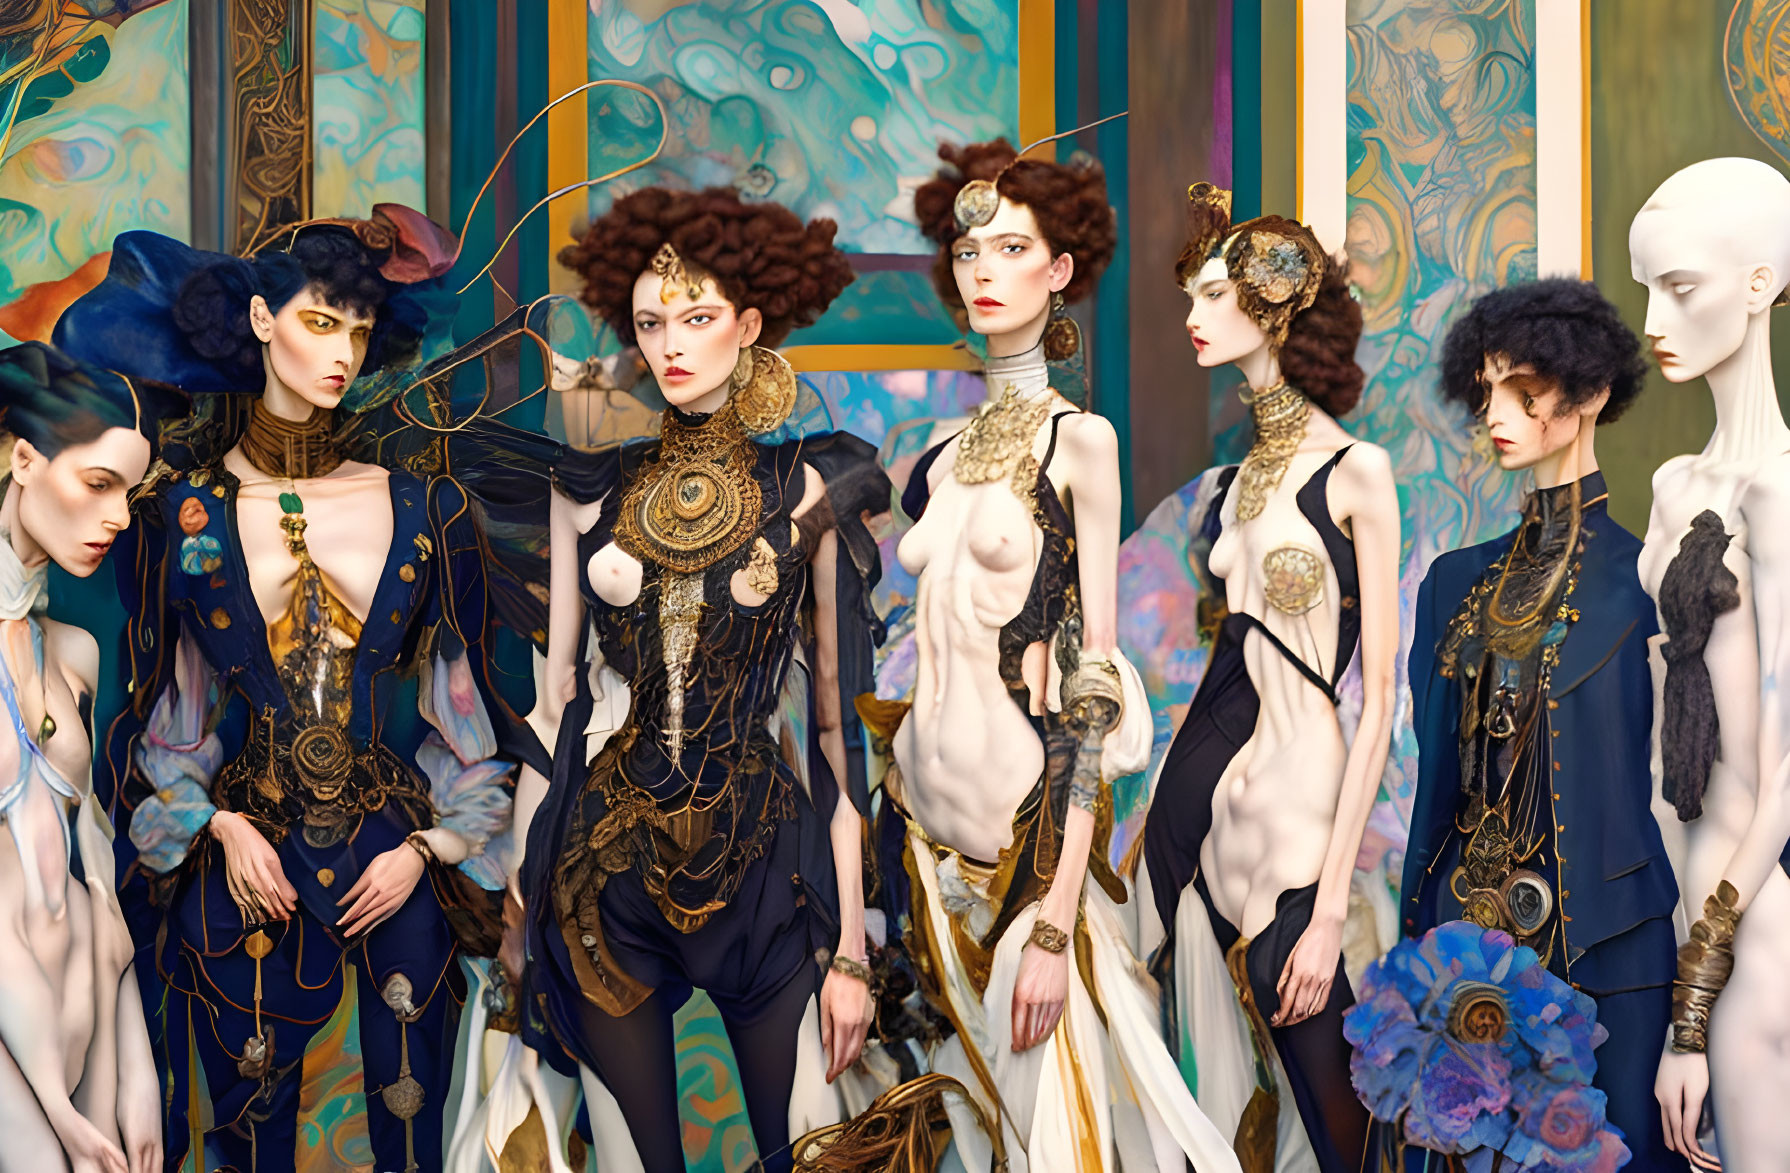 Seven Mannequins in Luxurious Gold and Black Garments with Baroque-Inspired Designs